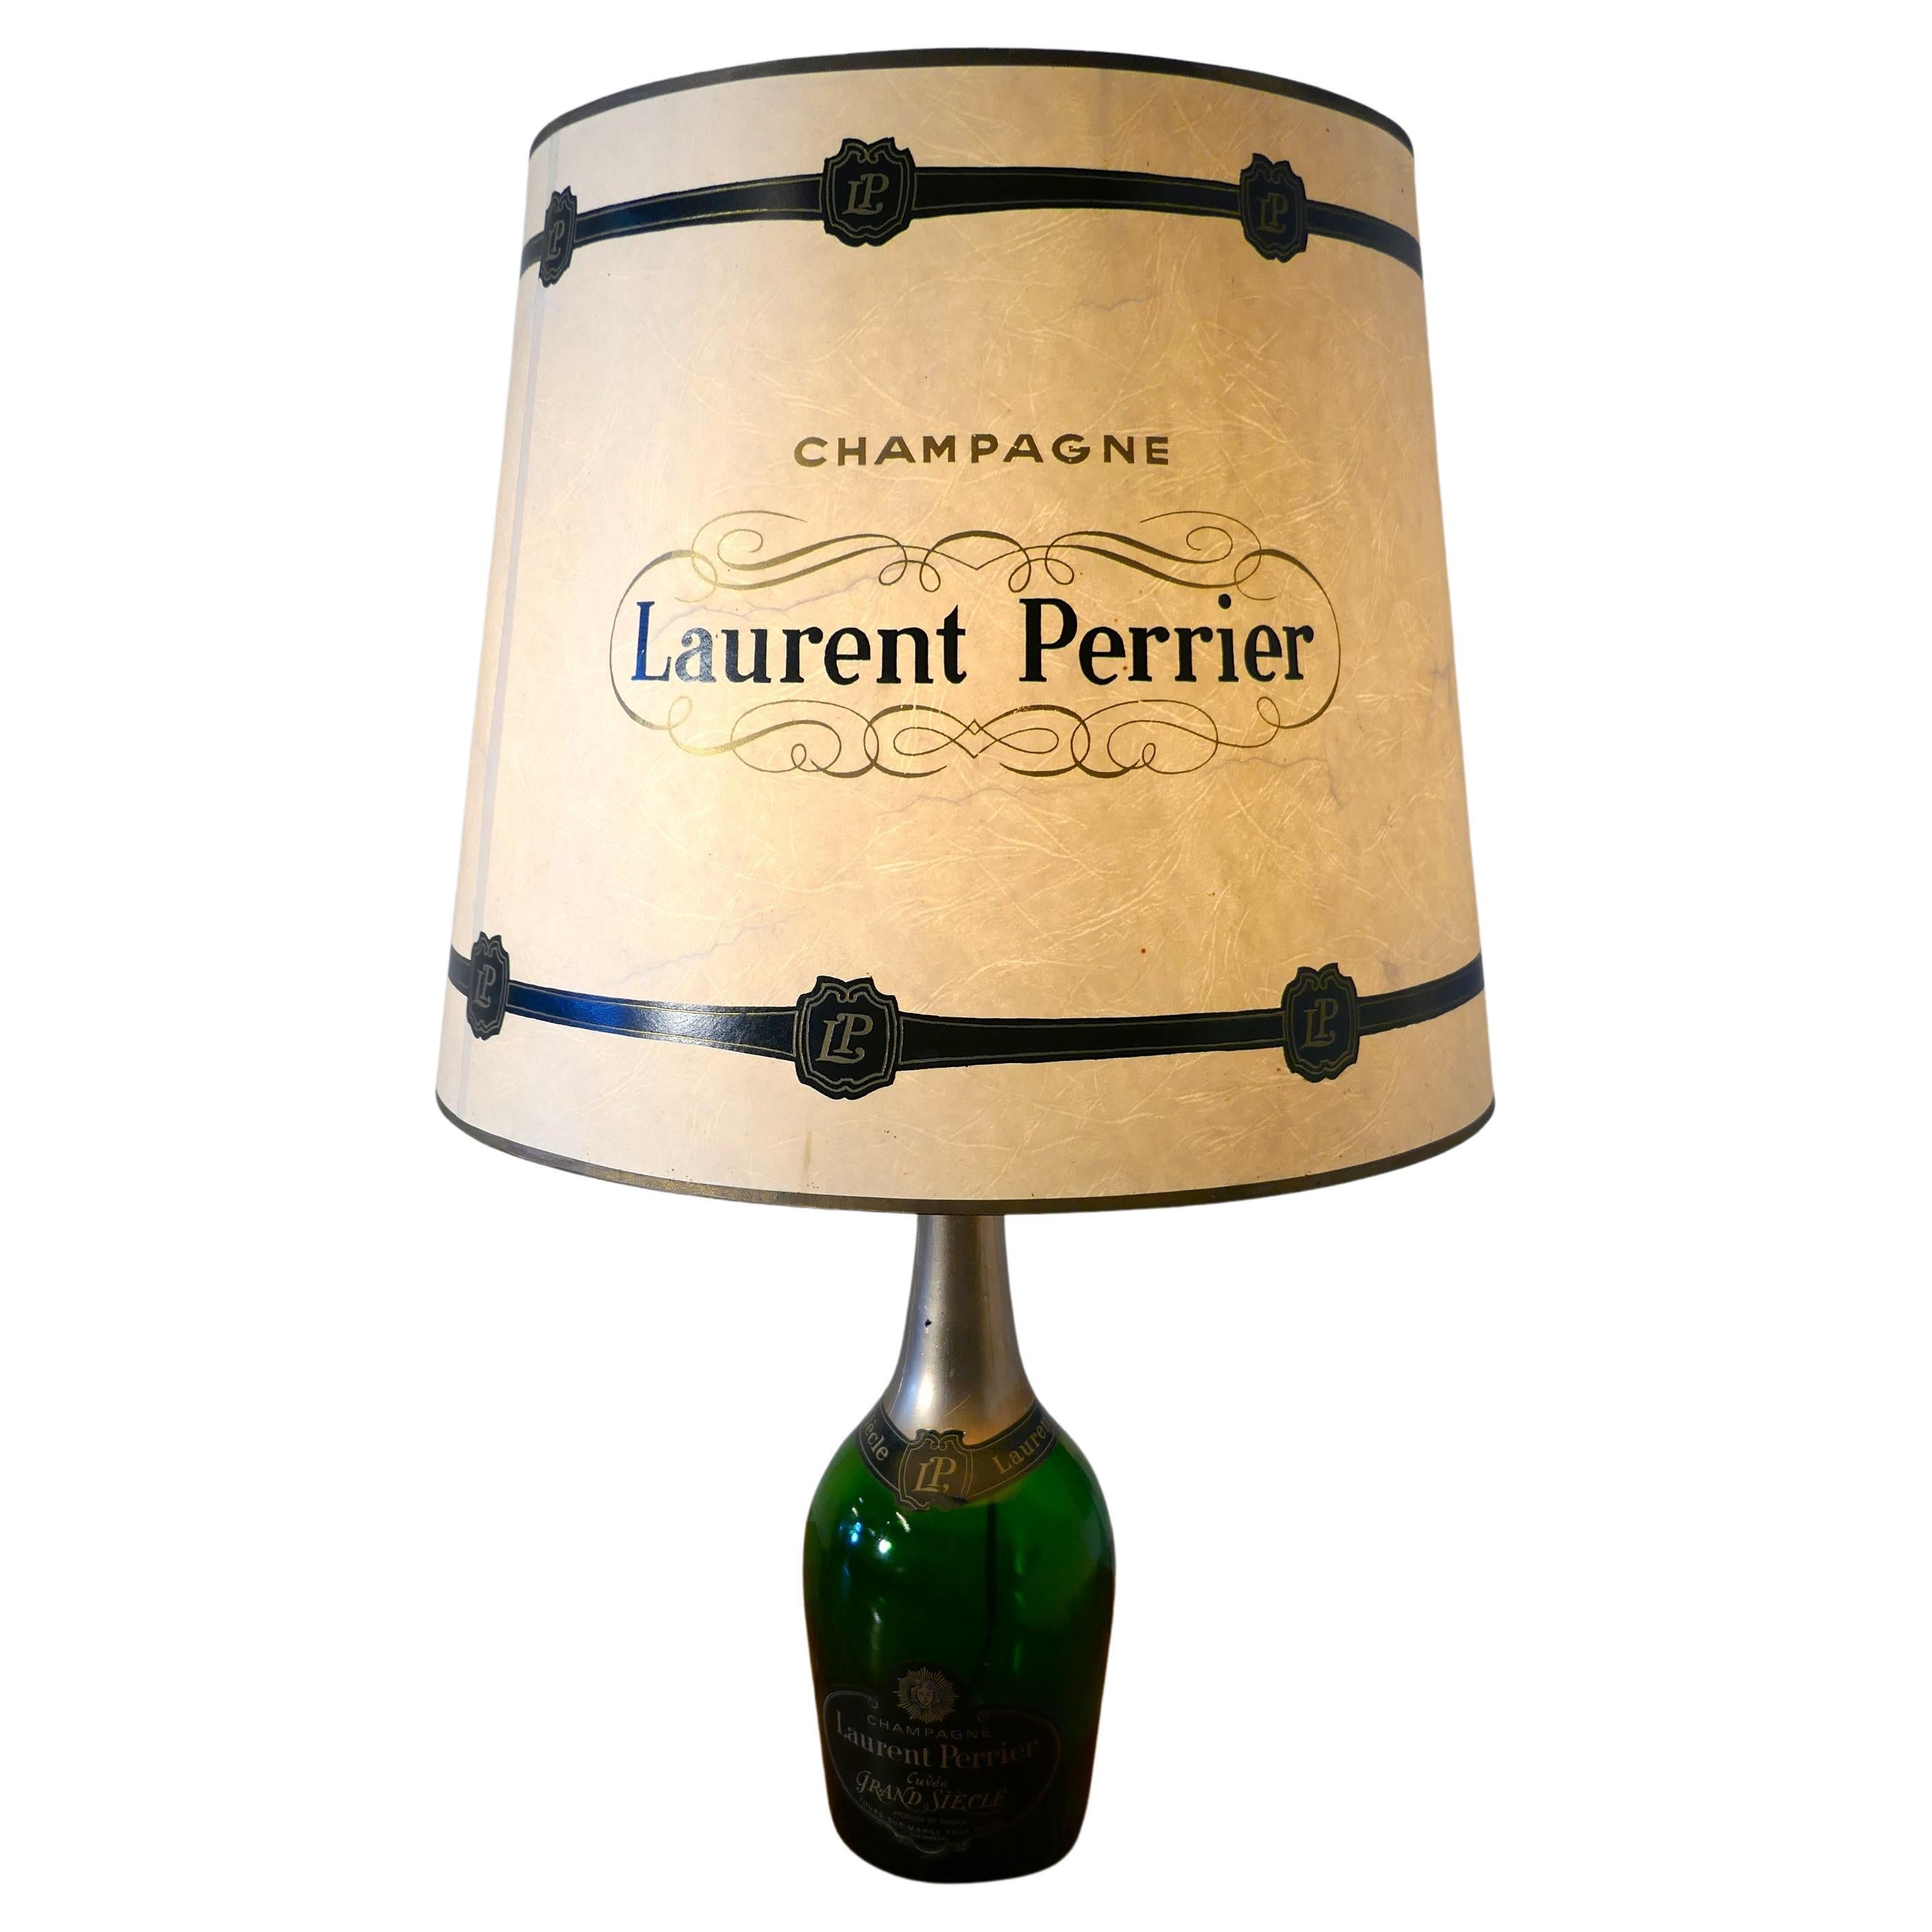 Laurent Perrier Champagne Cuveé Grand Siecle Black Label Advertising Table Lamp 